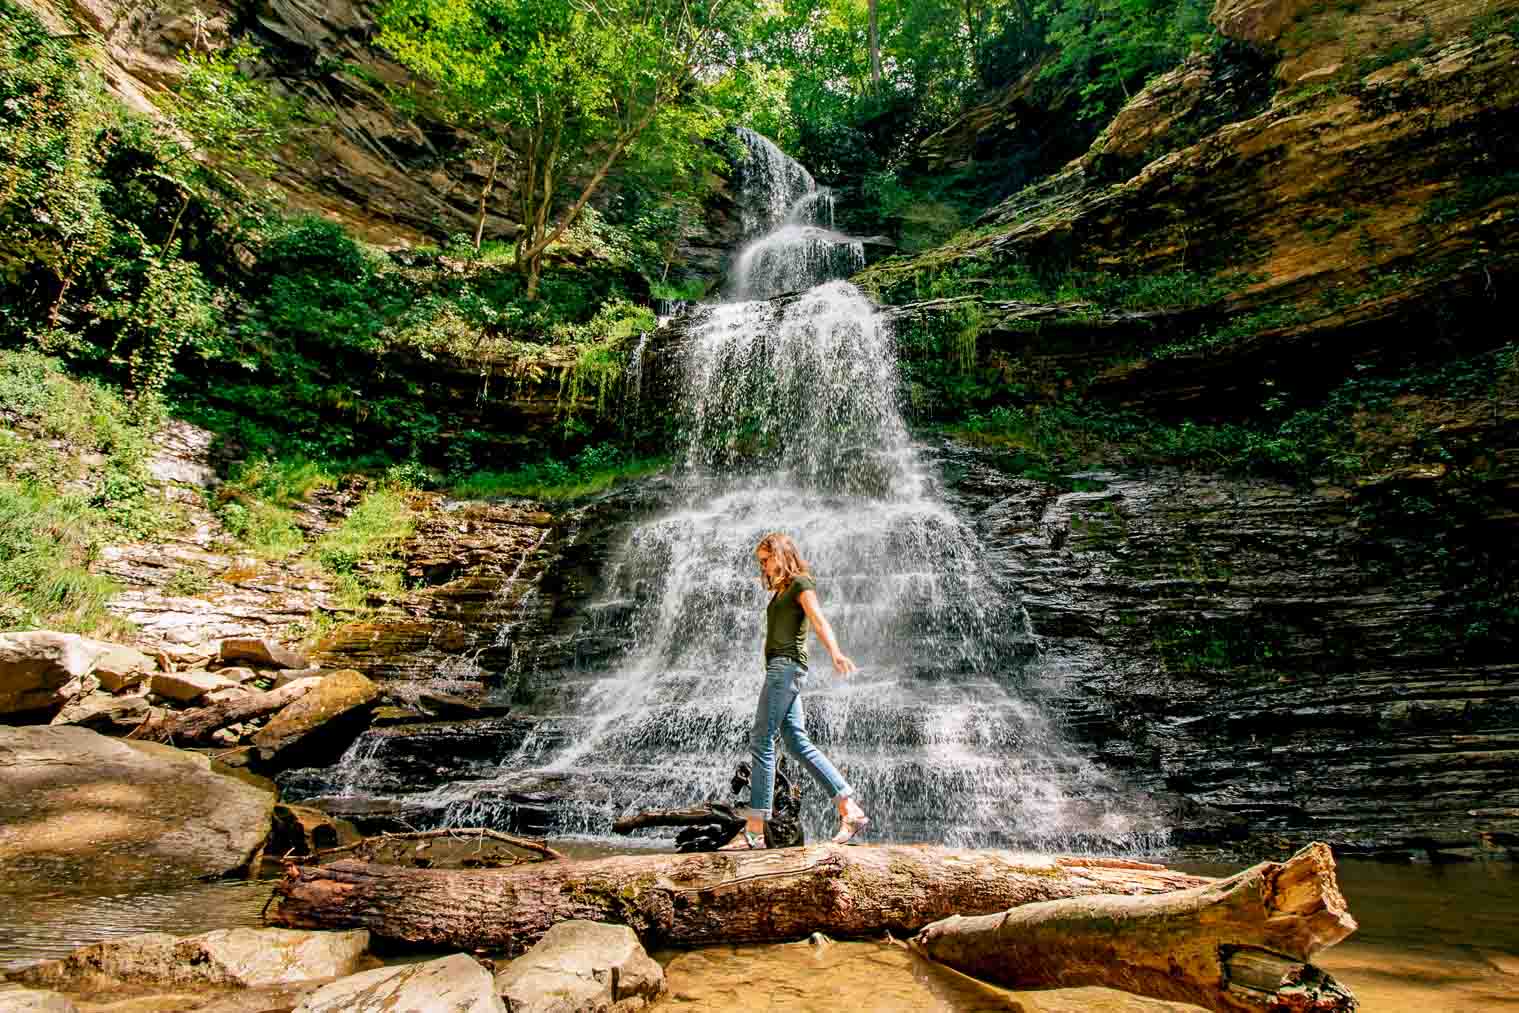 Megan in front of Cathedral Falls in West Virginia